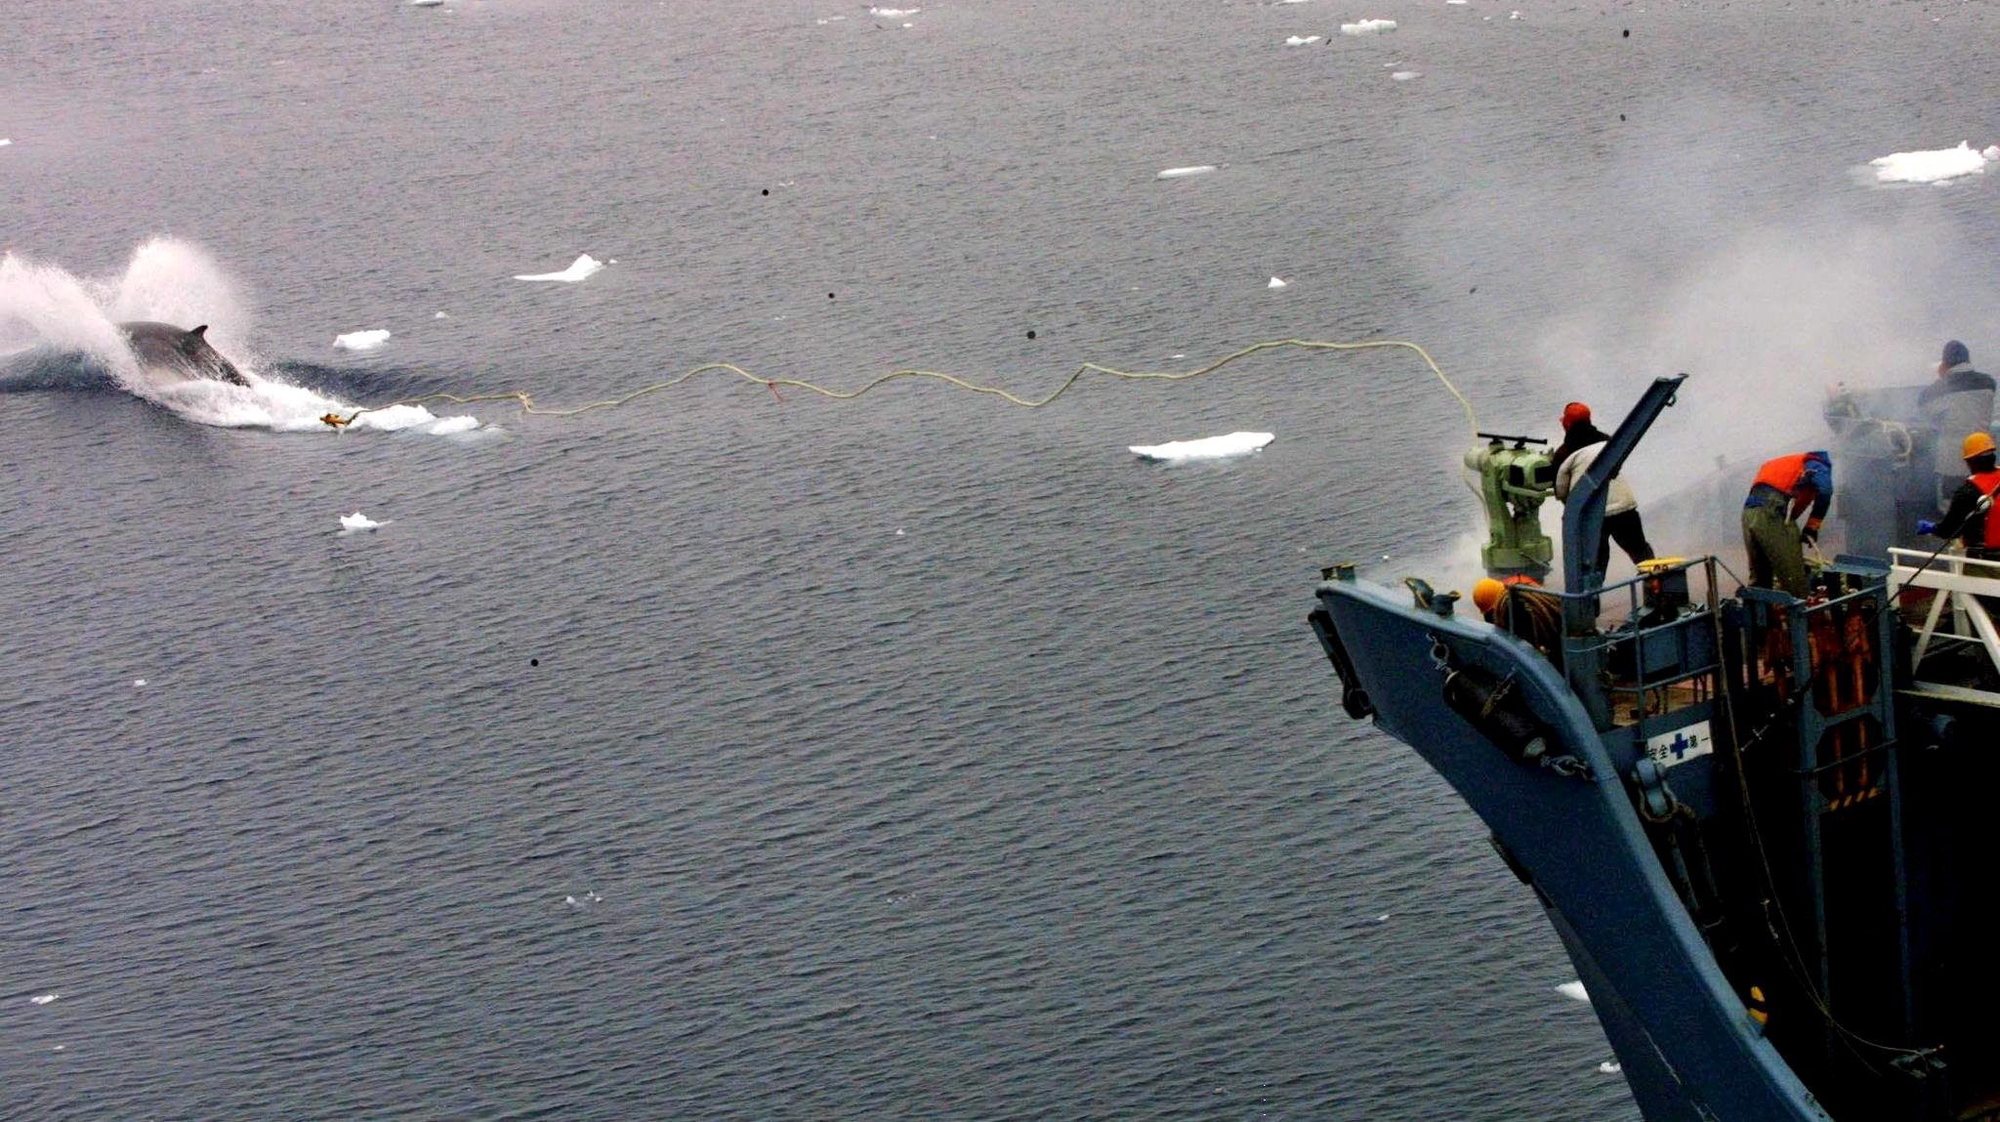 epa04148470 (FILE) A file handout photo dated 16 December 2001 and made available by Greenpeace, showing a whale catcher ship Kyo Maru 1, using a harpoon to catch a whale in Southern Ocean. A UN court in The Hague on 31 March 2014 halted Japan&#039;s much-criticized whaling programme, ruling that it contravenes a 1986 moratorium on whale hunting. Japan must end its &#039;research whaling&#039; programme, the International Court of Justice (ICJ) said. Japan said the programme was for scientific research and permitted under international conventions. Australia had brought the case to the ICJ in 2010, charging that Japan was breaching international law by killing hundreds of whales every year for commercial purposes. Japan was â€œdeeply disappointedâ€ by the ruling, an unnamed government official was quoted by the Kyodo News agency as saying. But the official said Japan would stand by the ruling.  EPA/JEREMY SUTTON-HIBBERT / HO  HANDOUT EDITORIAL USE ONLY/NO SALES *** Local Caption *** 99356789